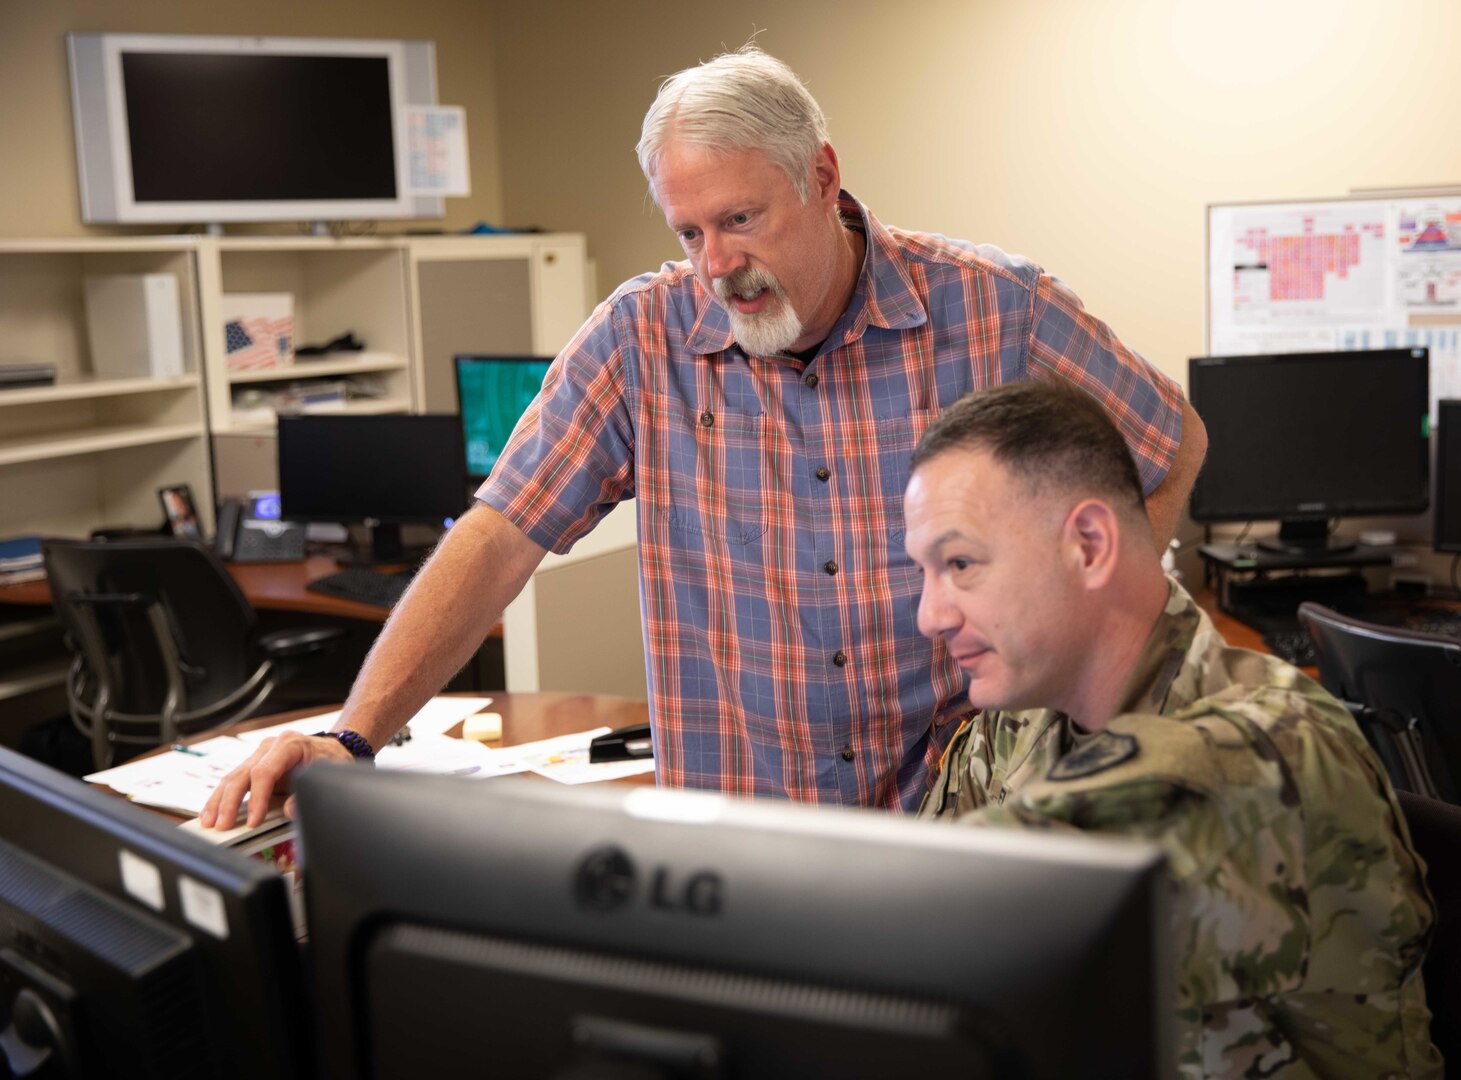 John Williams, Joint Task Force Civil Support (JTF-CS) policy and doctrine analyst, and Army Capt. Steve Elpel, JTF-CS chemical, biological, radiological, or nuclear, (CBRN) Response Planner discuss plans for upcoming exercises.  Both Williams and Capt. Elpel use their combined knowledge and planning skills in providing continued support of JTF-CS mission to the nation. JTF-CS is a standing joint task force and subordinate command of U.S. Army North (USARNORTH) charged with providing command and control of Department of Defense forces deployed to support a Lead Federal Agency in response to a CBRN incident in the United States and its territories and possessions.  (U.S. Navy Photo by Mass Communication Specialist 1st Class David Smalls, III/RELEASED)